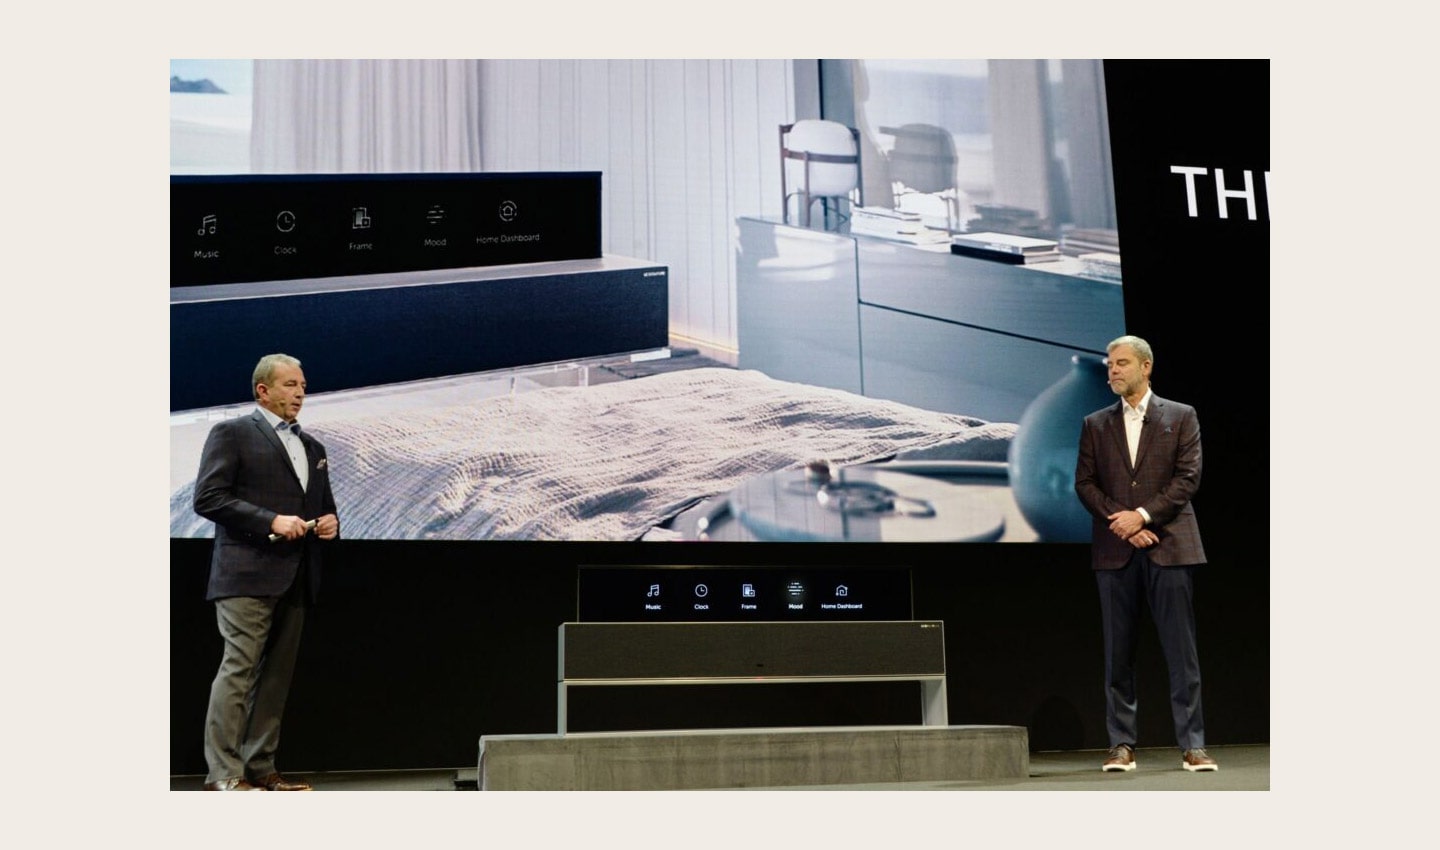 David VanderWall, Senior Vice President of Marketing at LG Electronics USA and Tim Alessi Senior Director of Product Marketing for Home Entertainment Products at LG Electronics USA are onstage demonstrate the half-rolled display position of the LG SIGNATURE OLED TV R at LG's CES 2019 Press Conference while putting the TV between them.